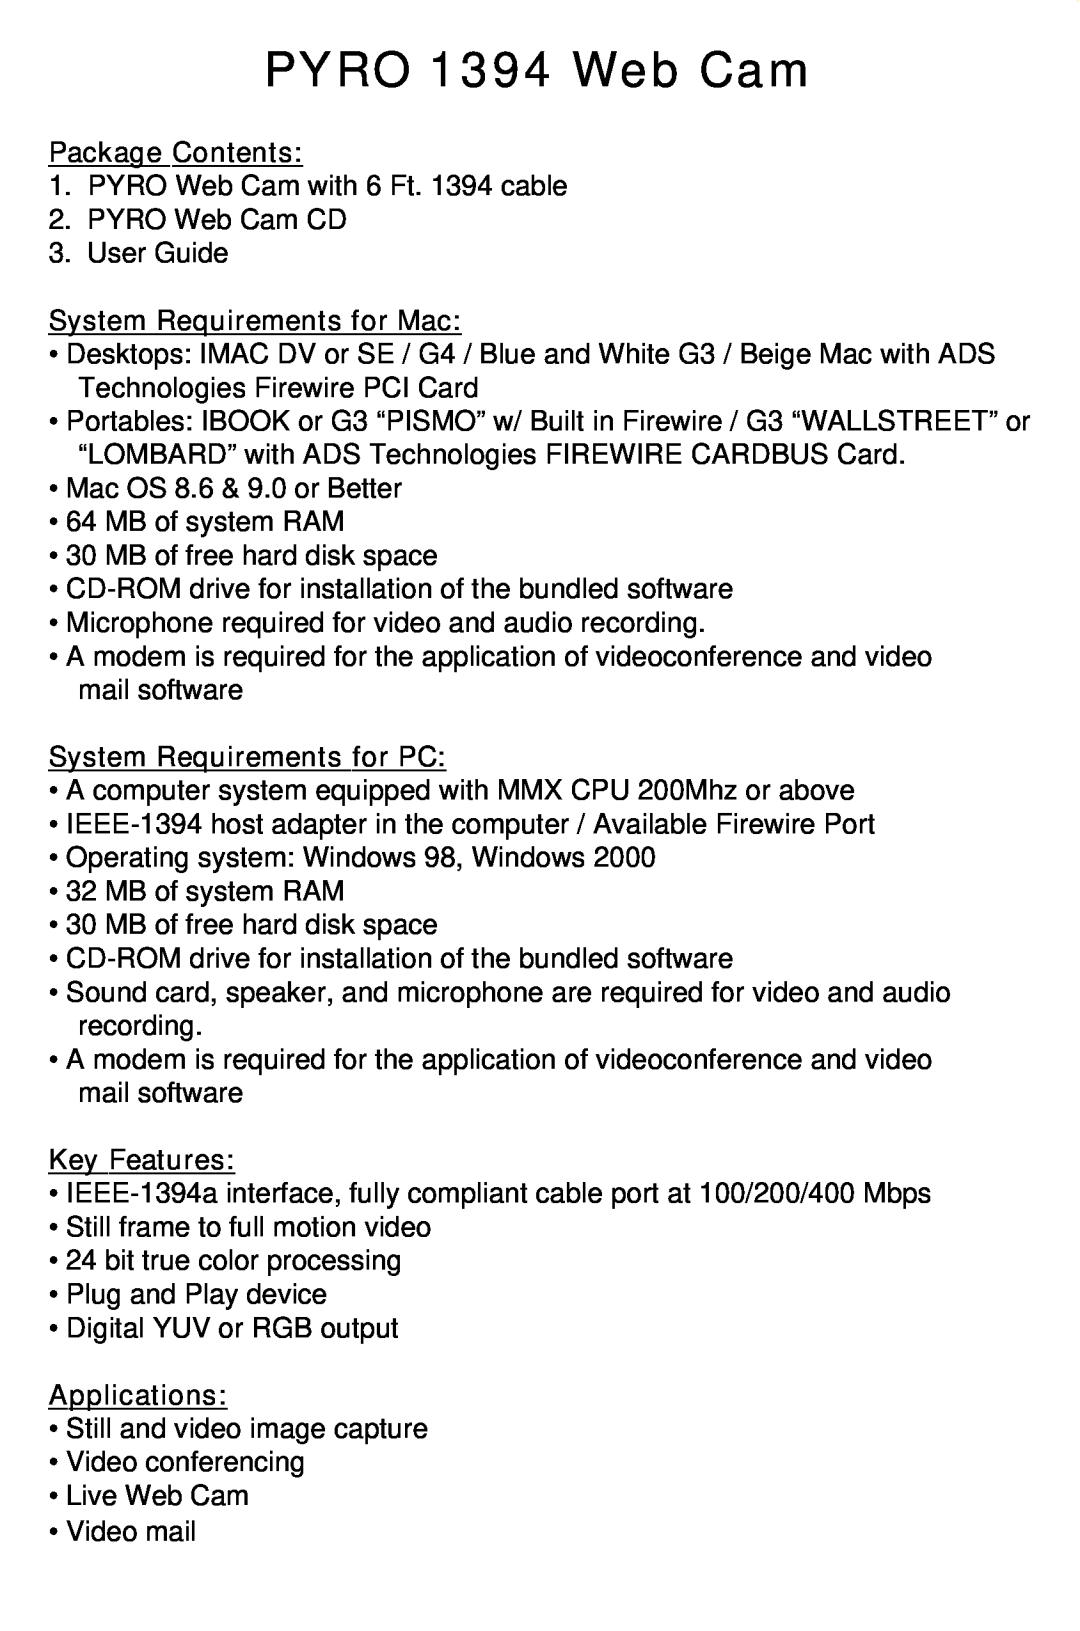 ADS Technologies manual PYRO 1394 Web Cam, Package Contents, System Requirements for Mac, System Requirements for PC 